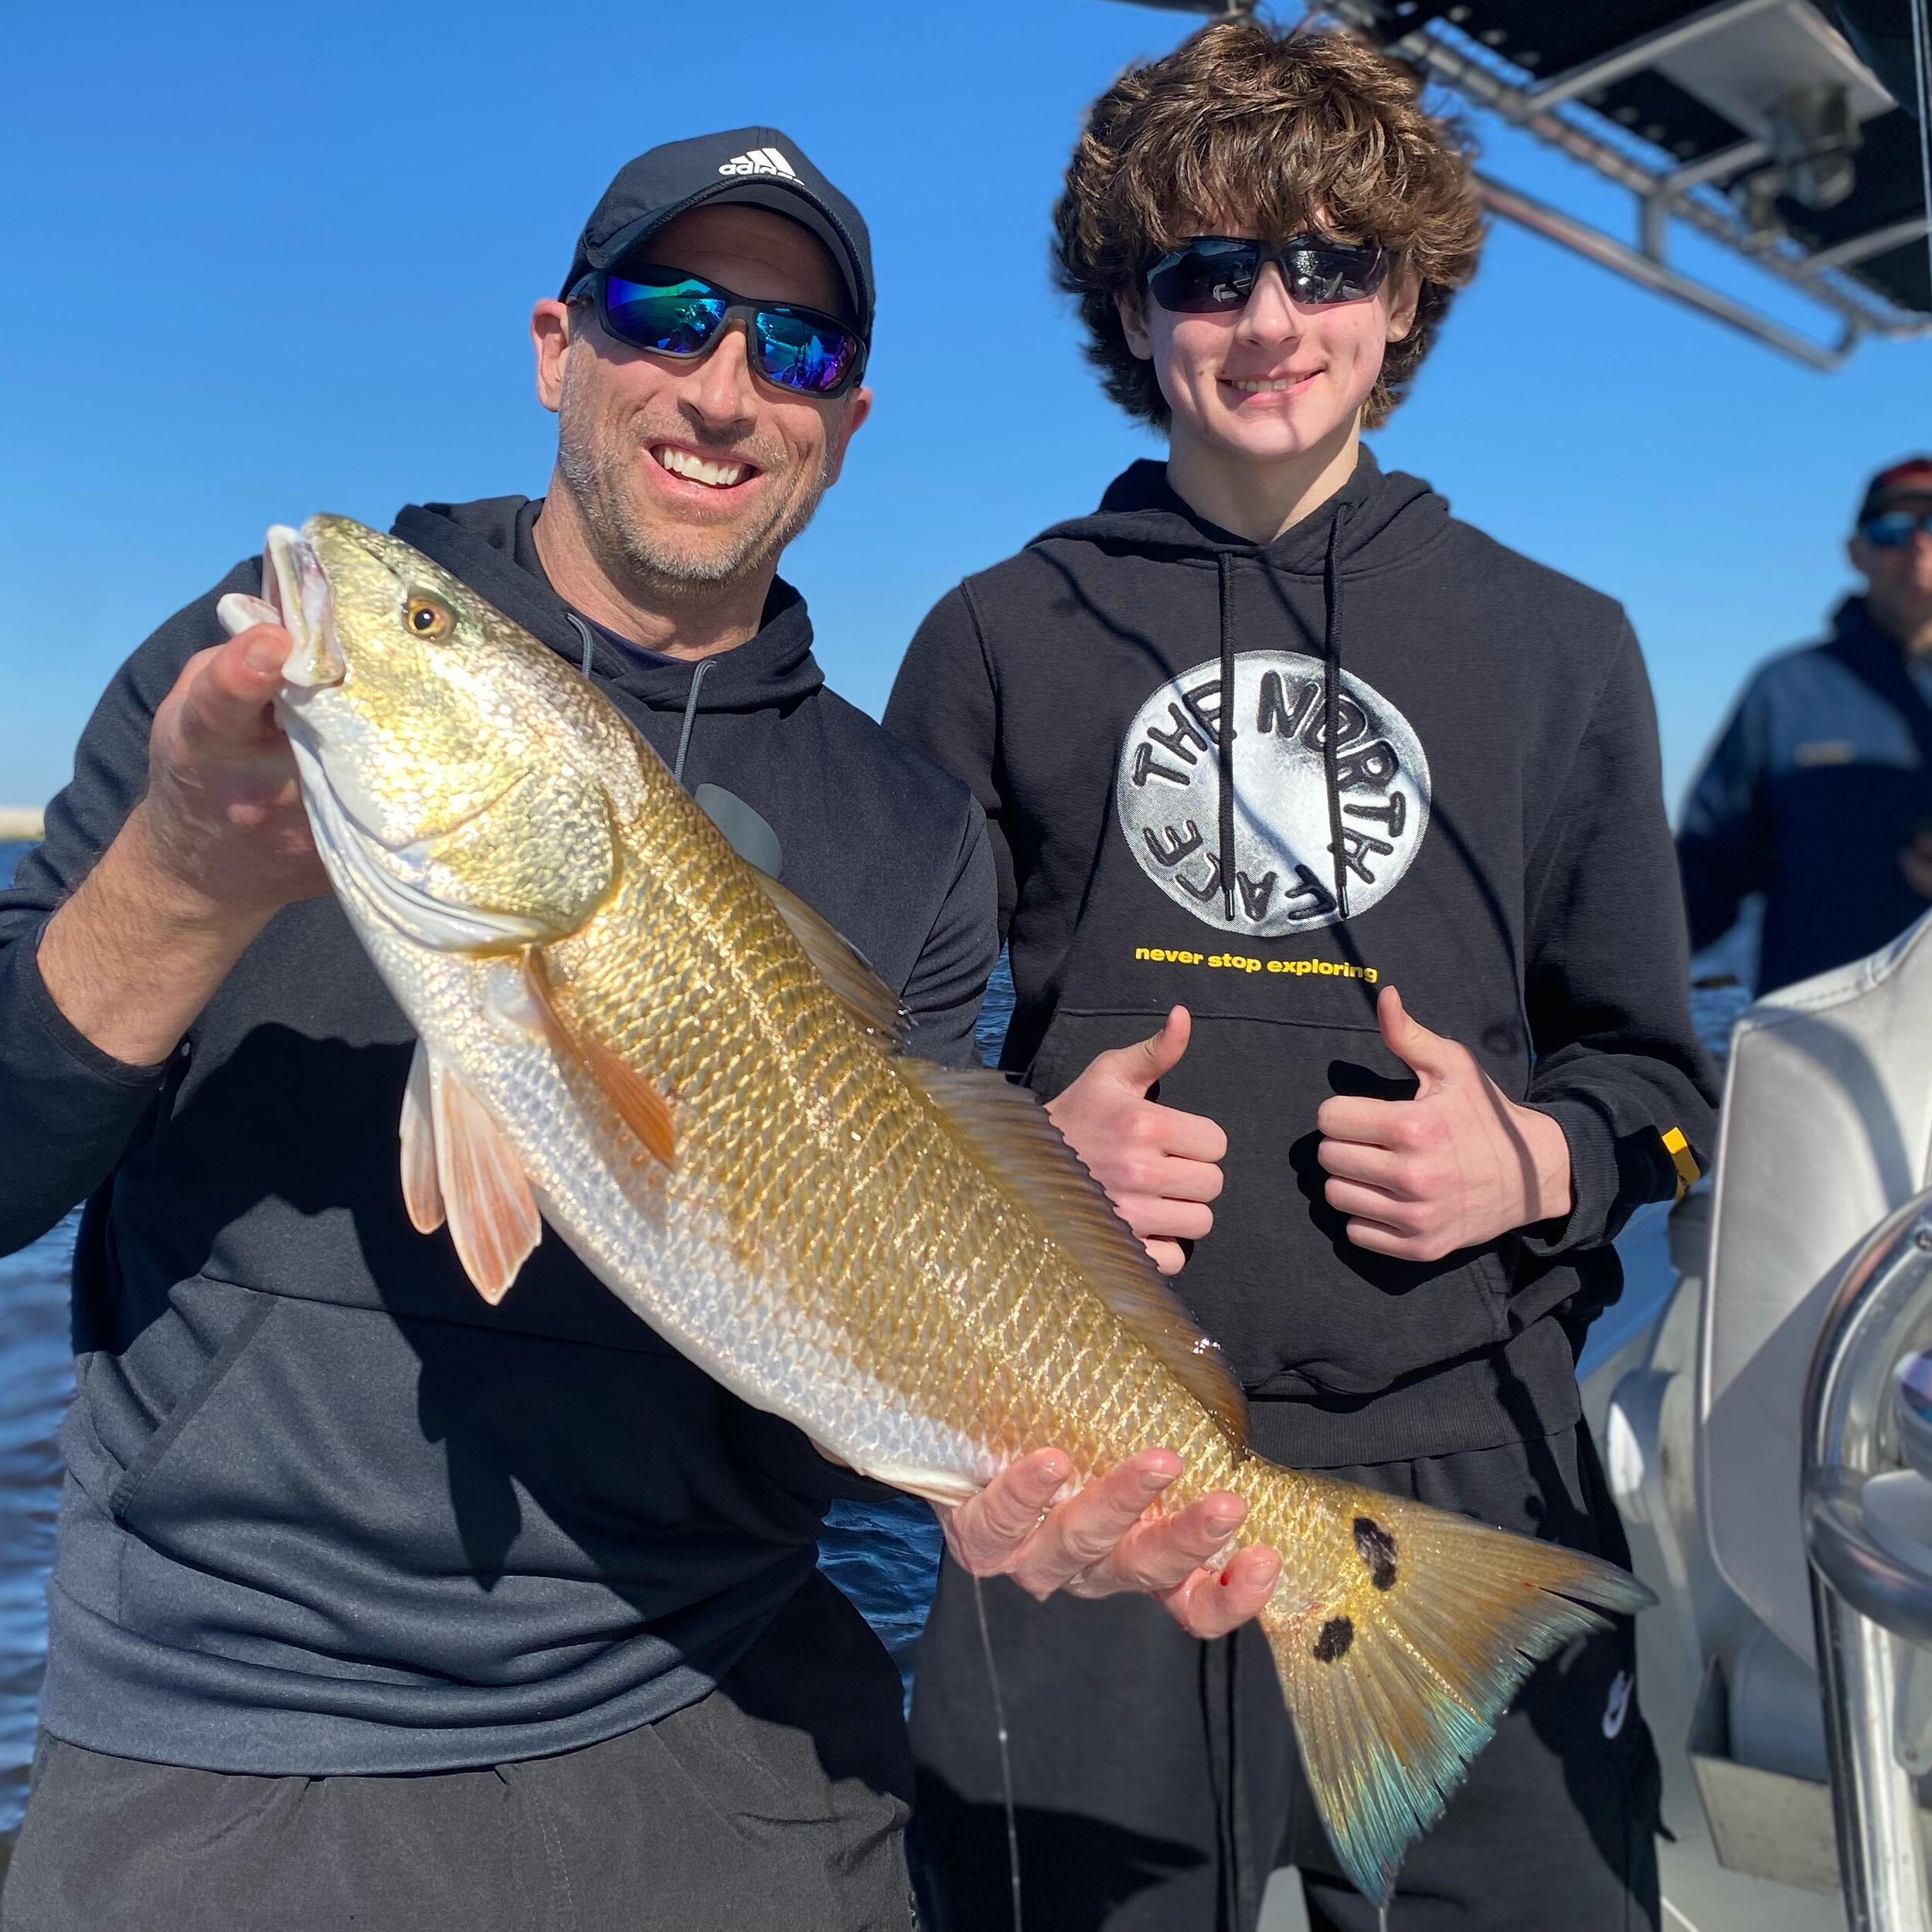 If ya fish for the fish, you&rsquo;re flat out missing the point! Incredible day making some memories. Lots of reds, a few sheepshead, flounder and more! 
-
-
-
#paircustoms #pairmarine #redfish #redbass #inshorefishing #bowedup